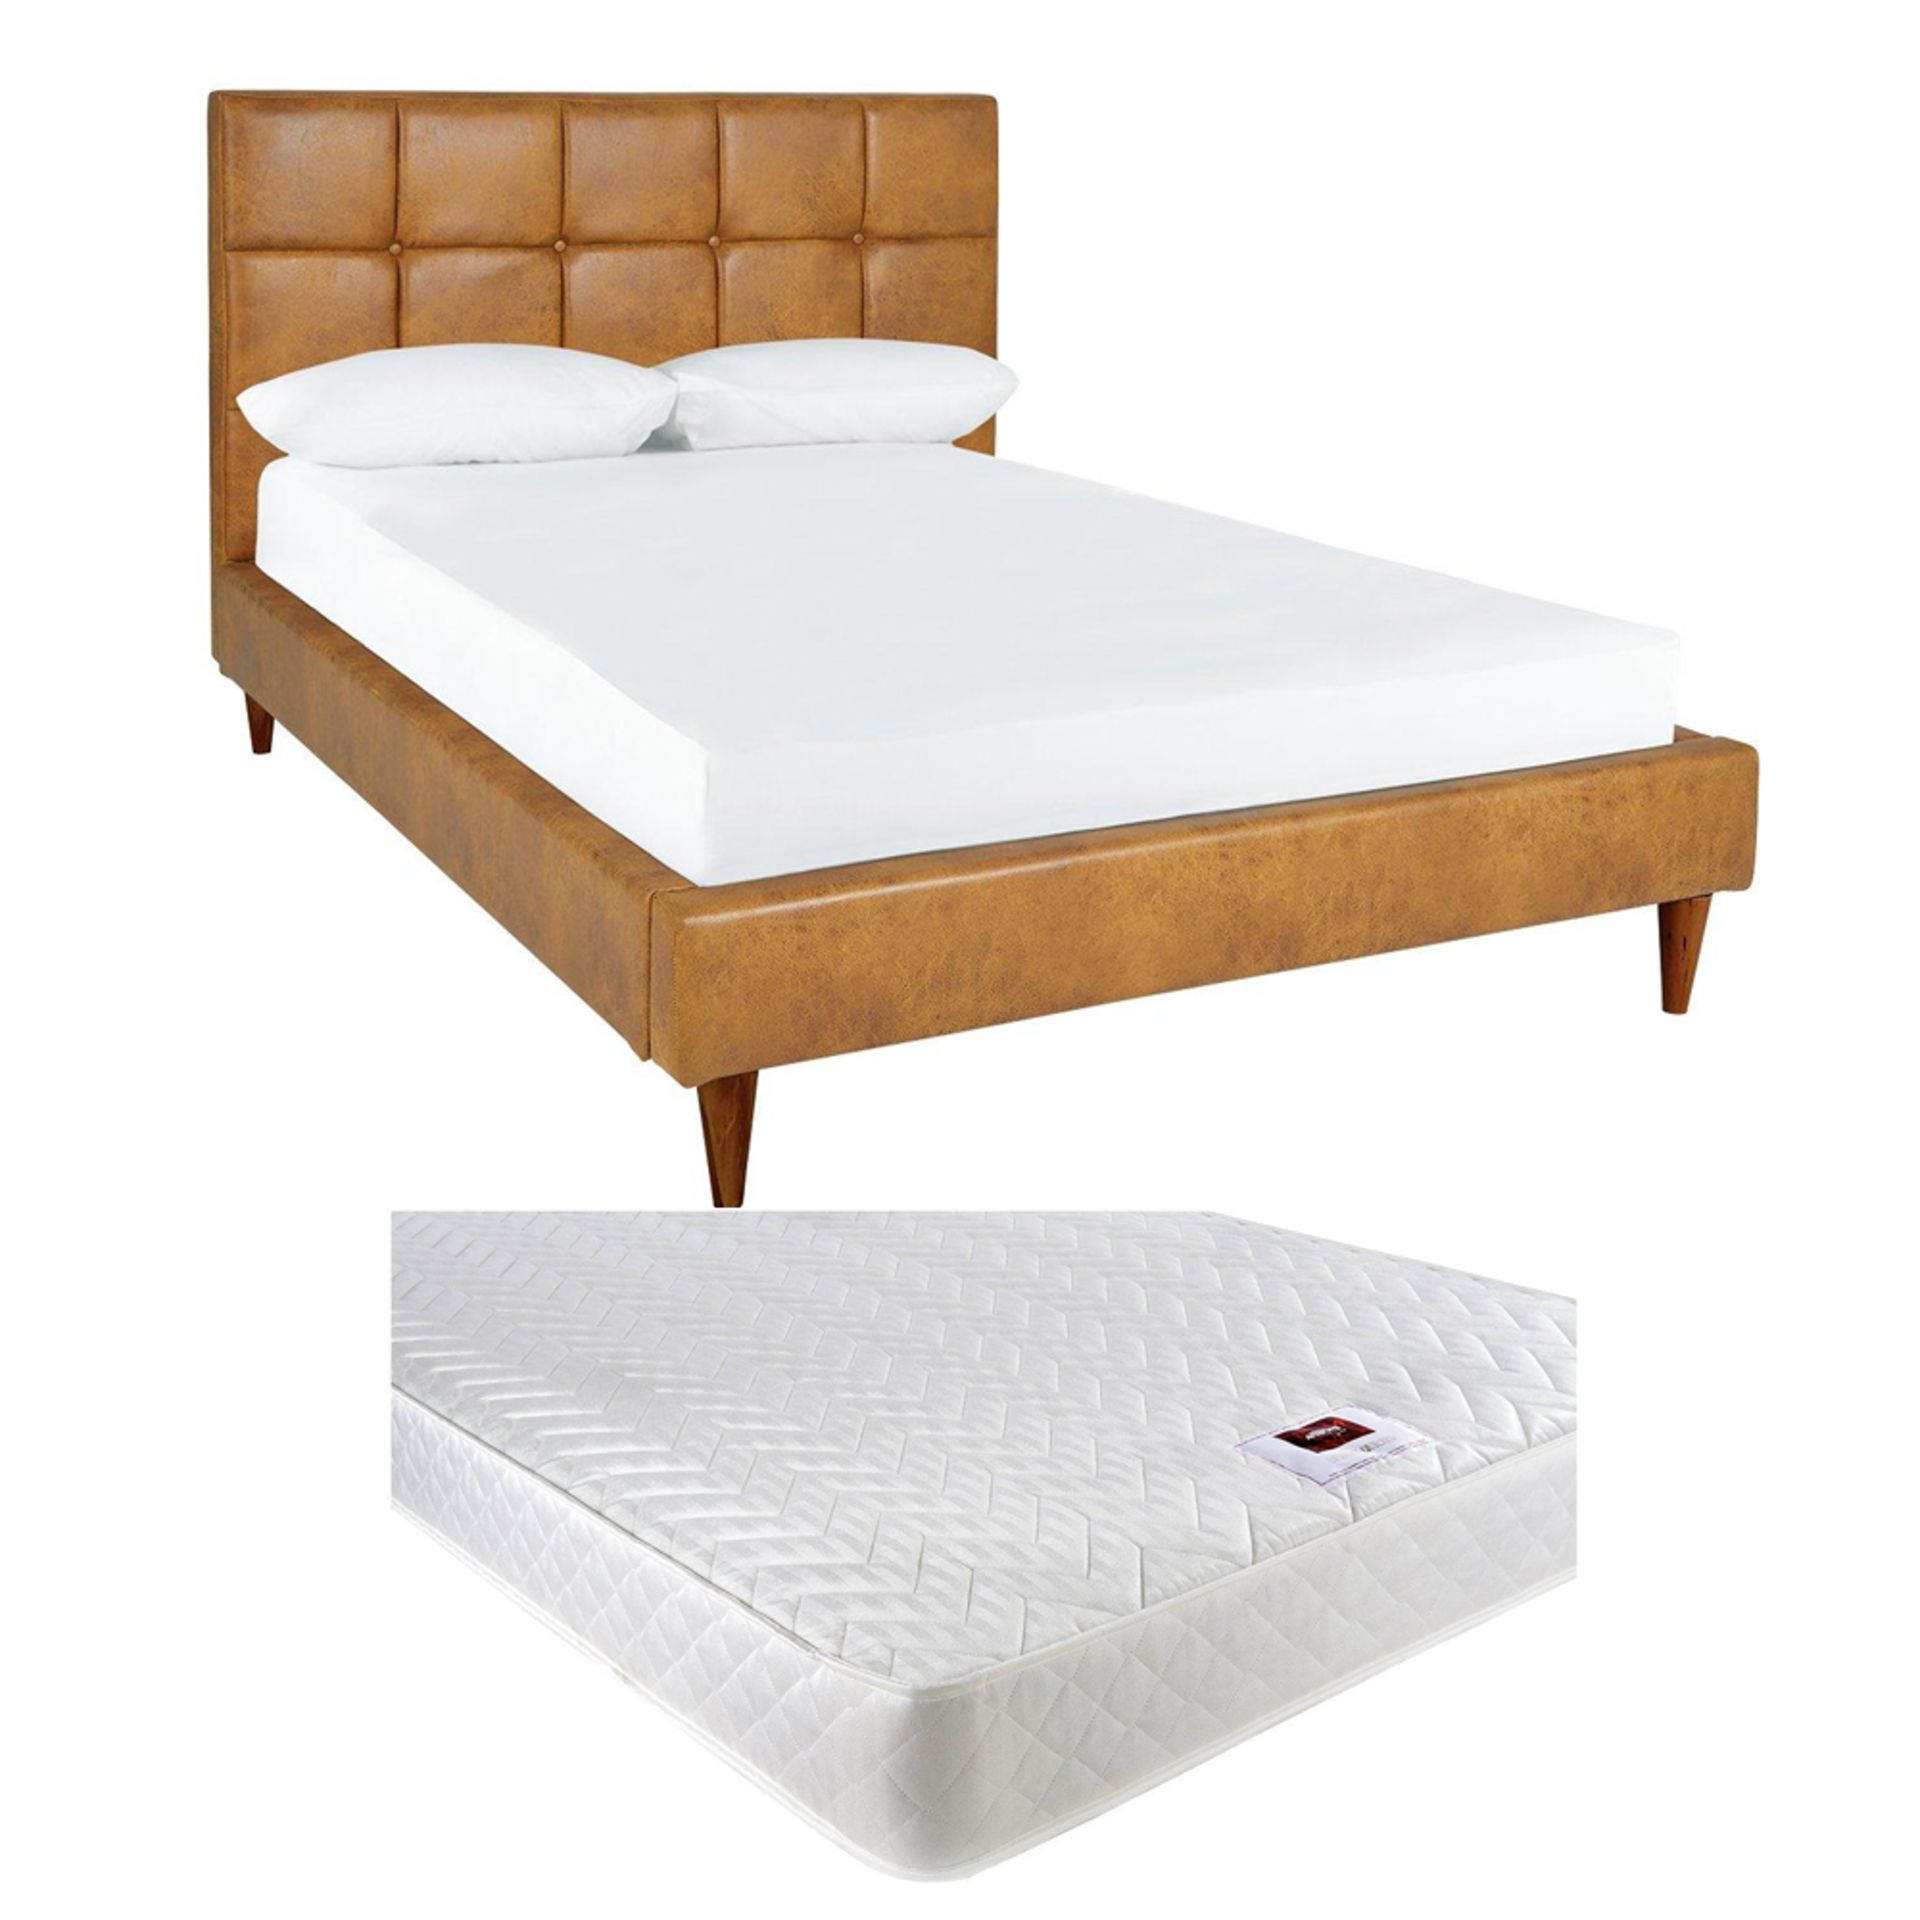 Boxed Item Olson Double Bed [Tan] And Mattress Set Rrp:¬£688